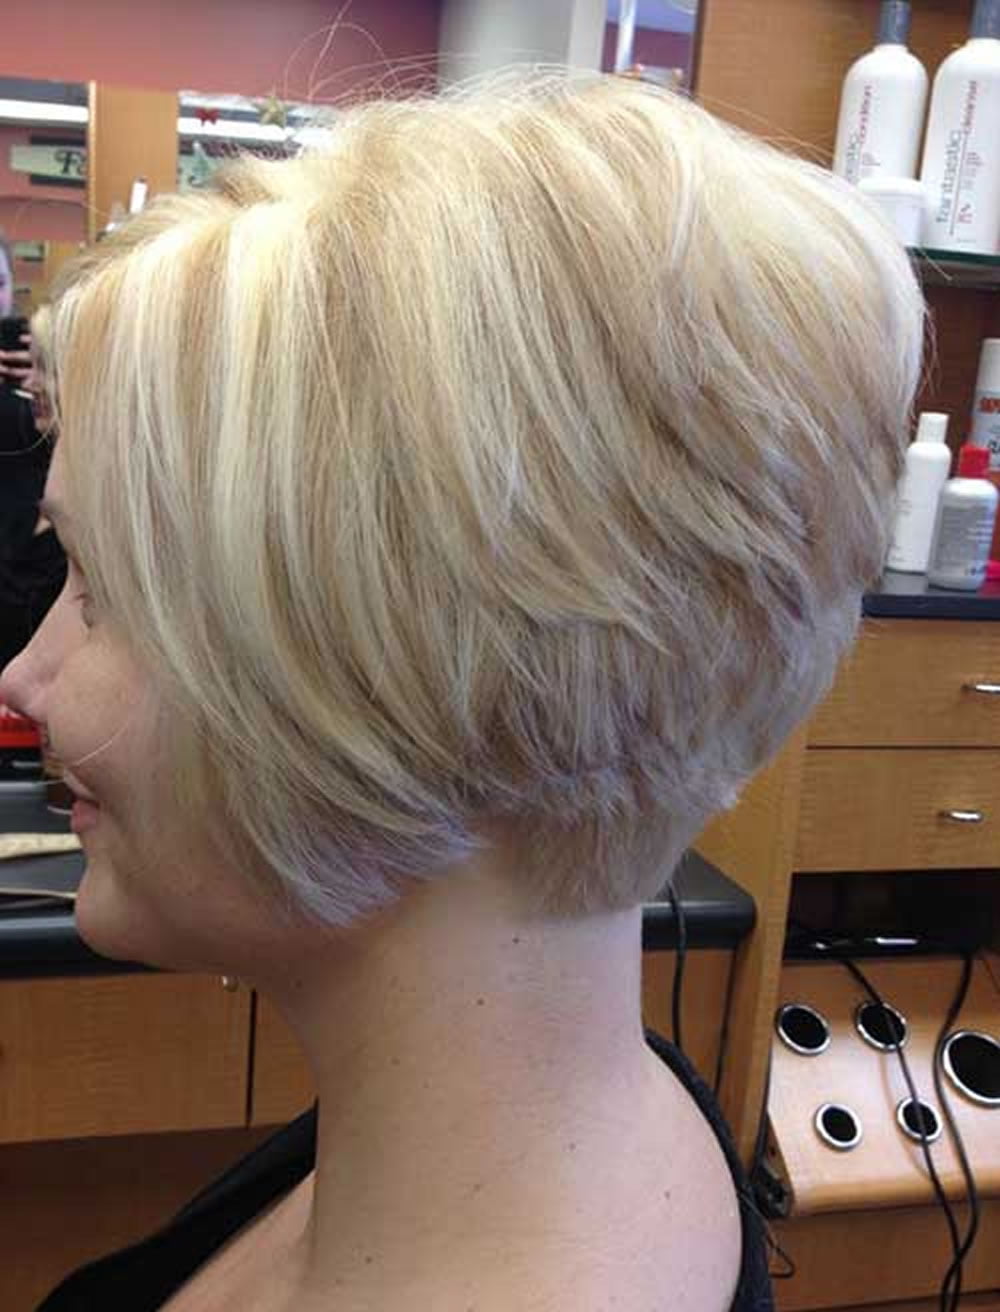 Very Stylish Short Haircuts for Older Women over 50 – HAIRSTYLES